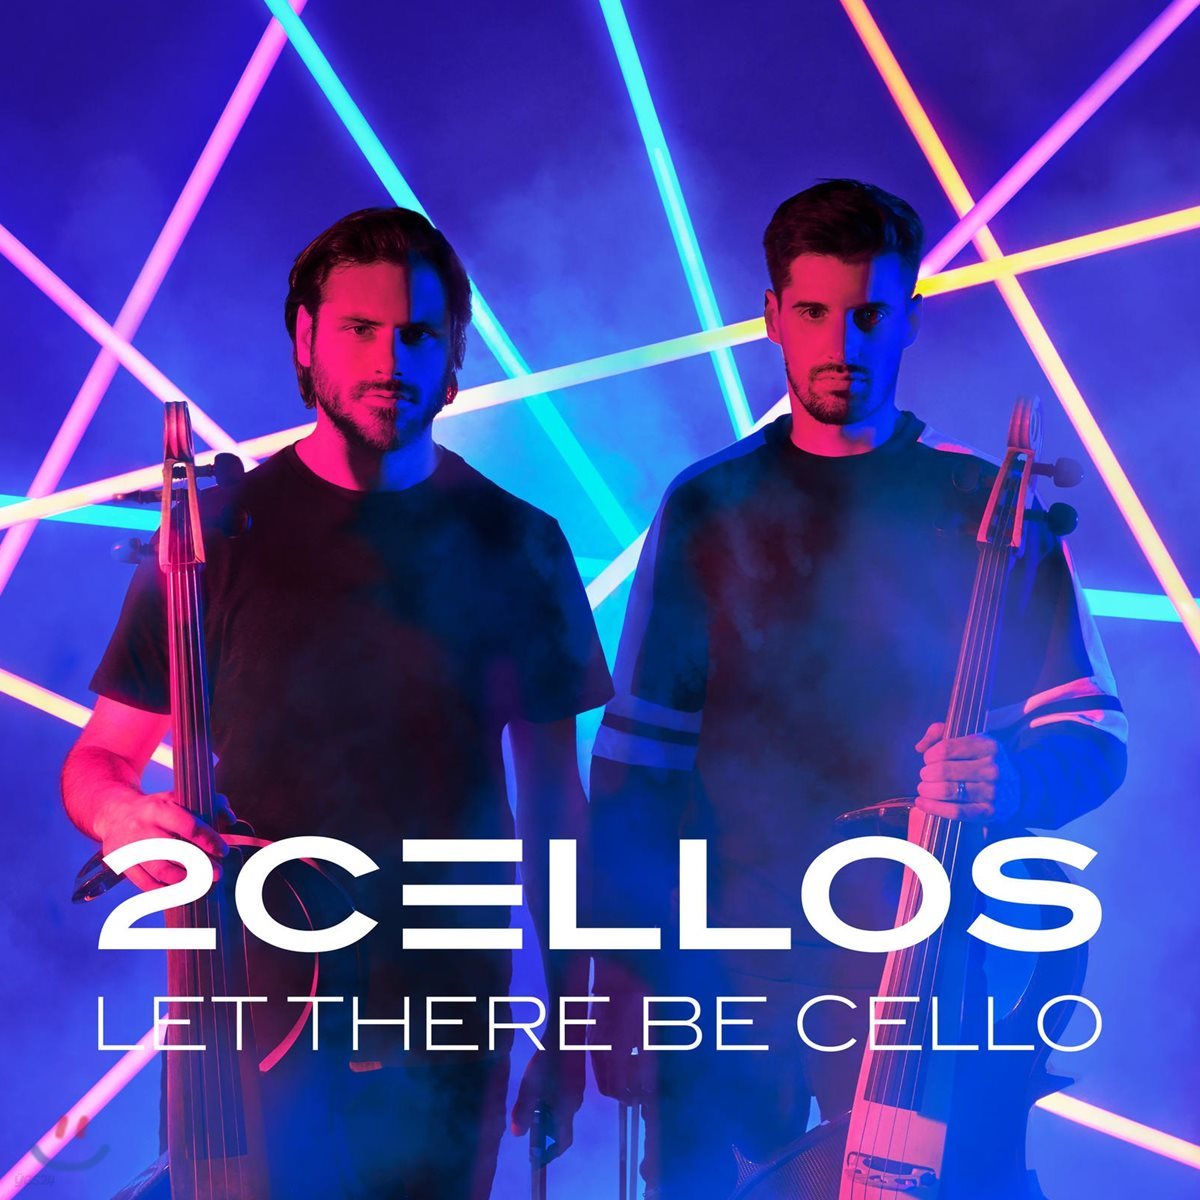 2Cellos (투첼로스) - 'Let There Be Cello' 